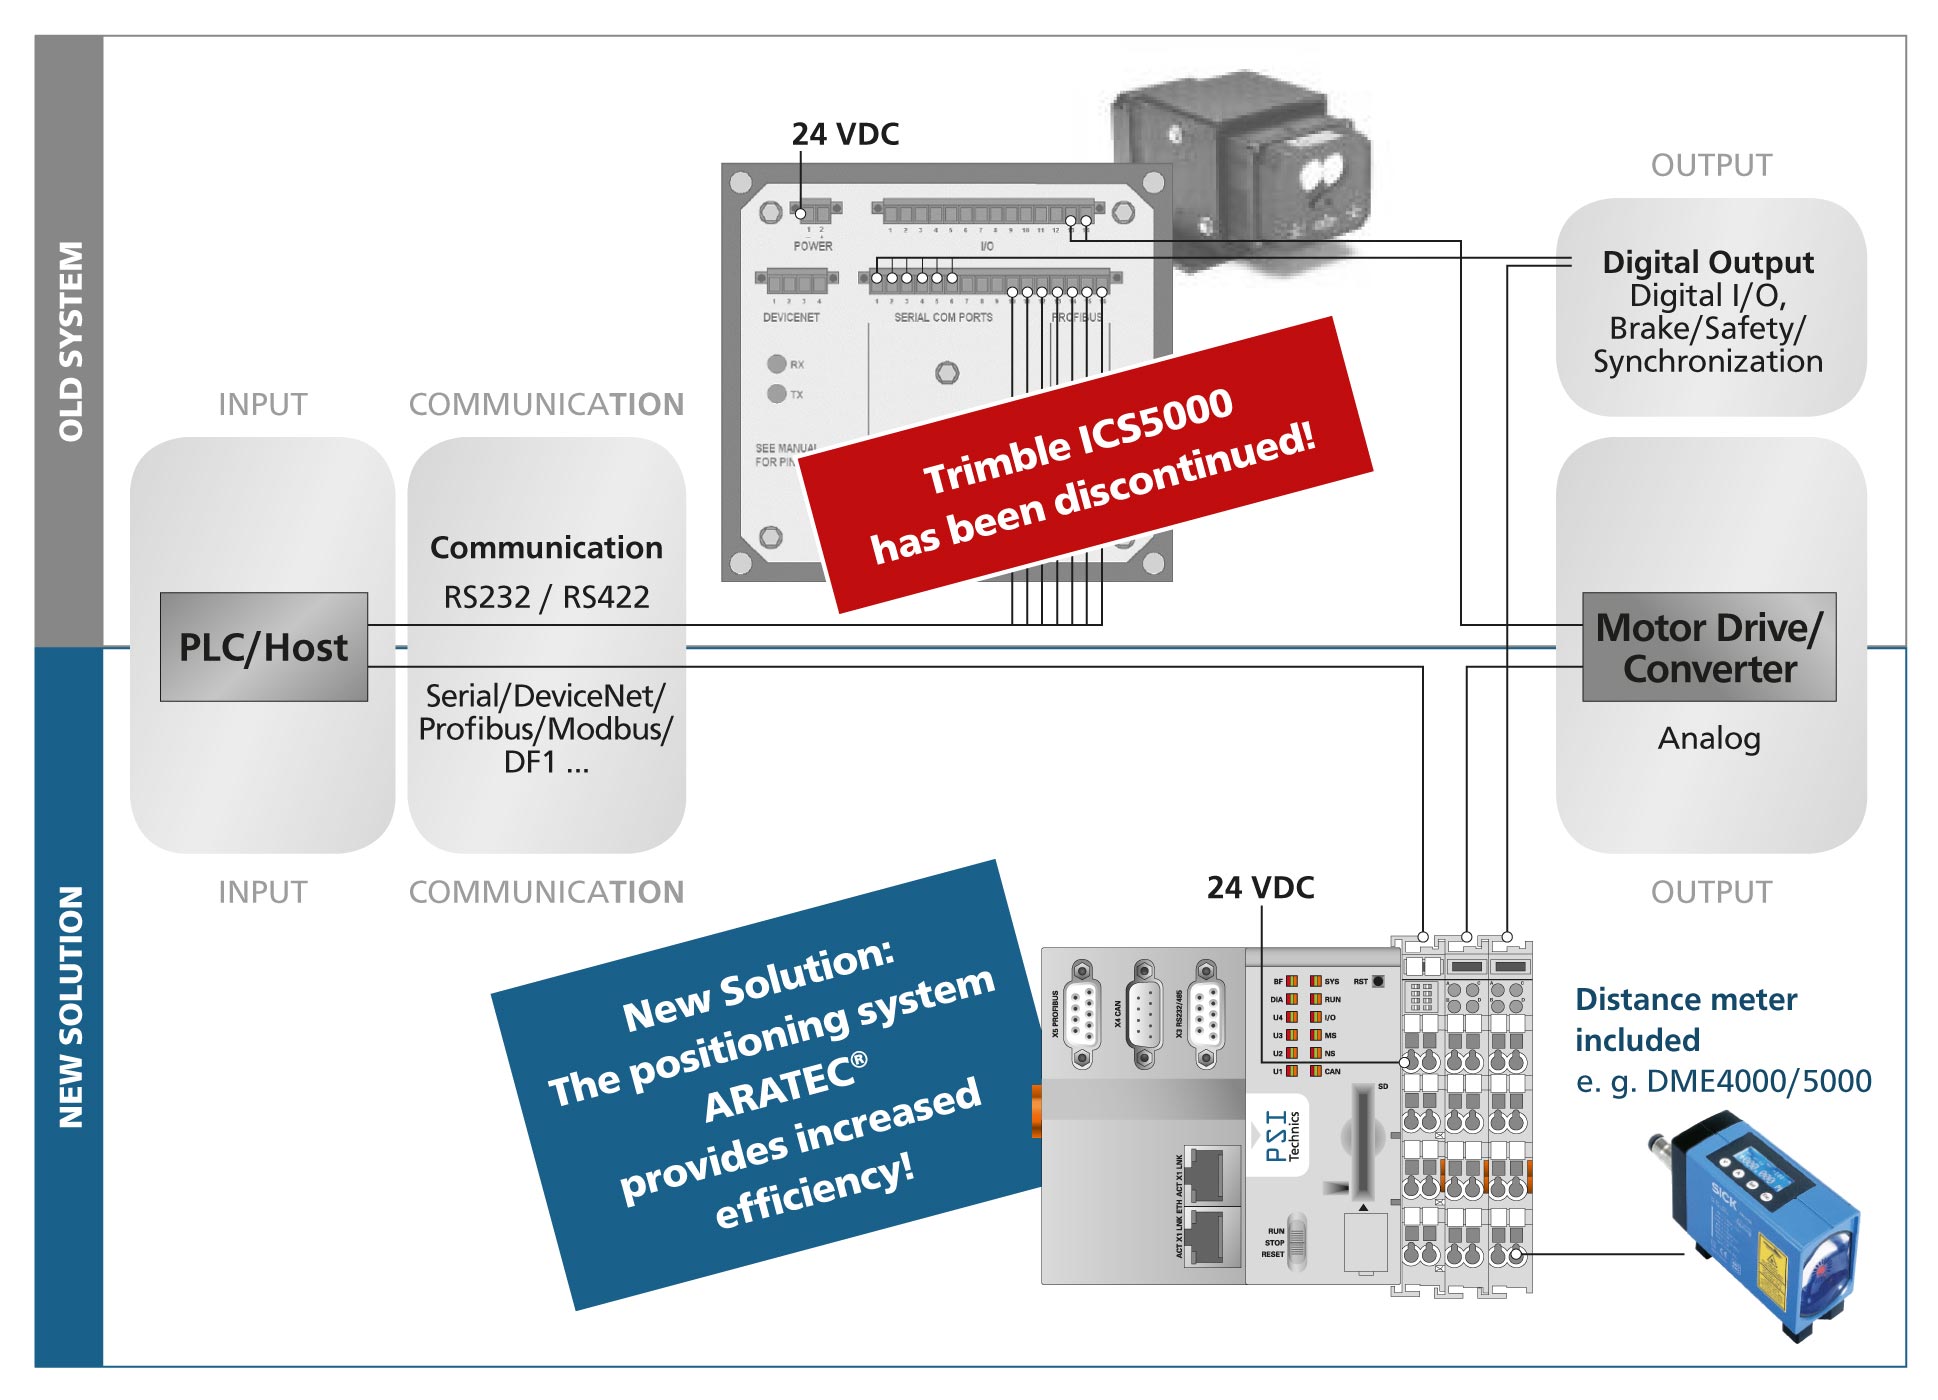 The system interface of ARATEC is compatible with existing Trimble devices, and there is no need for replacing existing controllers. It even works with existing communication protocols, I/O signals and analog set point values for motor drives. System integration requires no complex process control modifications or modifications to connected system components.